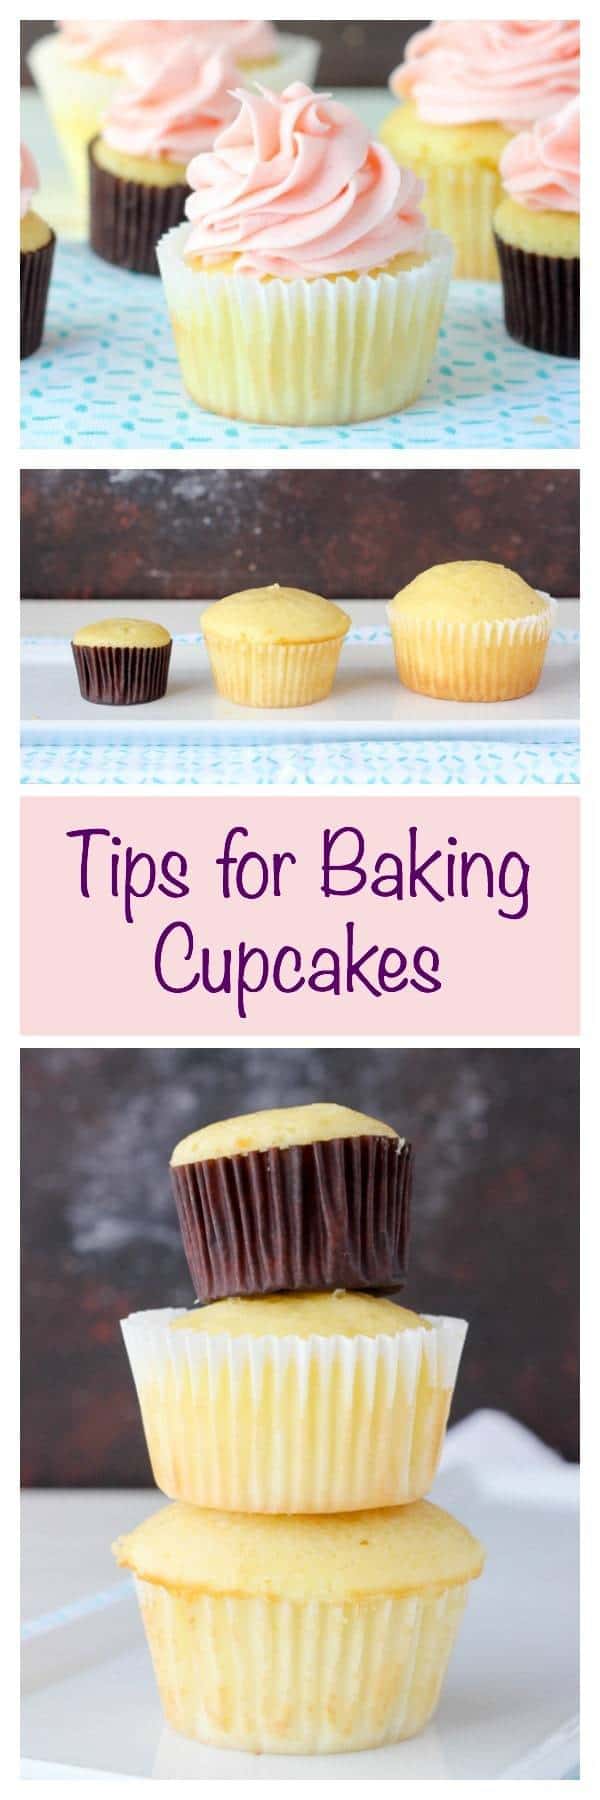  Tip and Tricks for making perfect cupcakes. This is your go-to guide for how to bake cupcakes including pan sizes and how full to fill each liner.